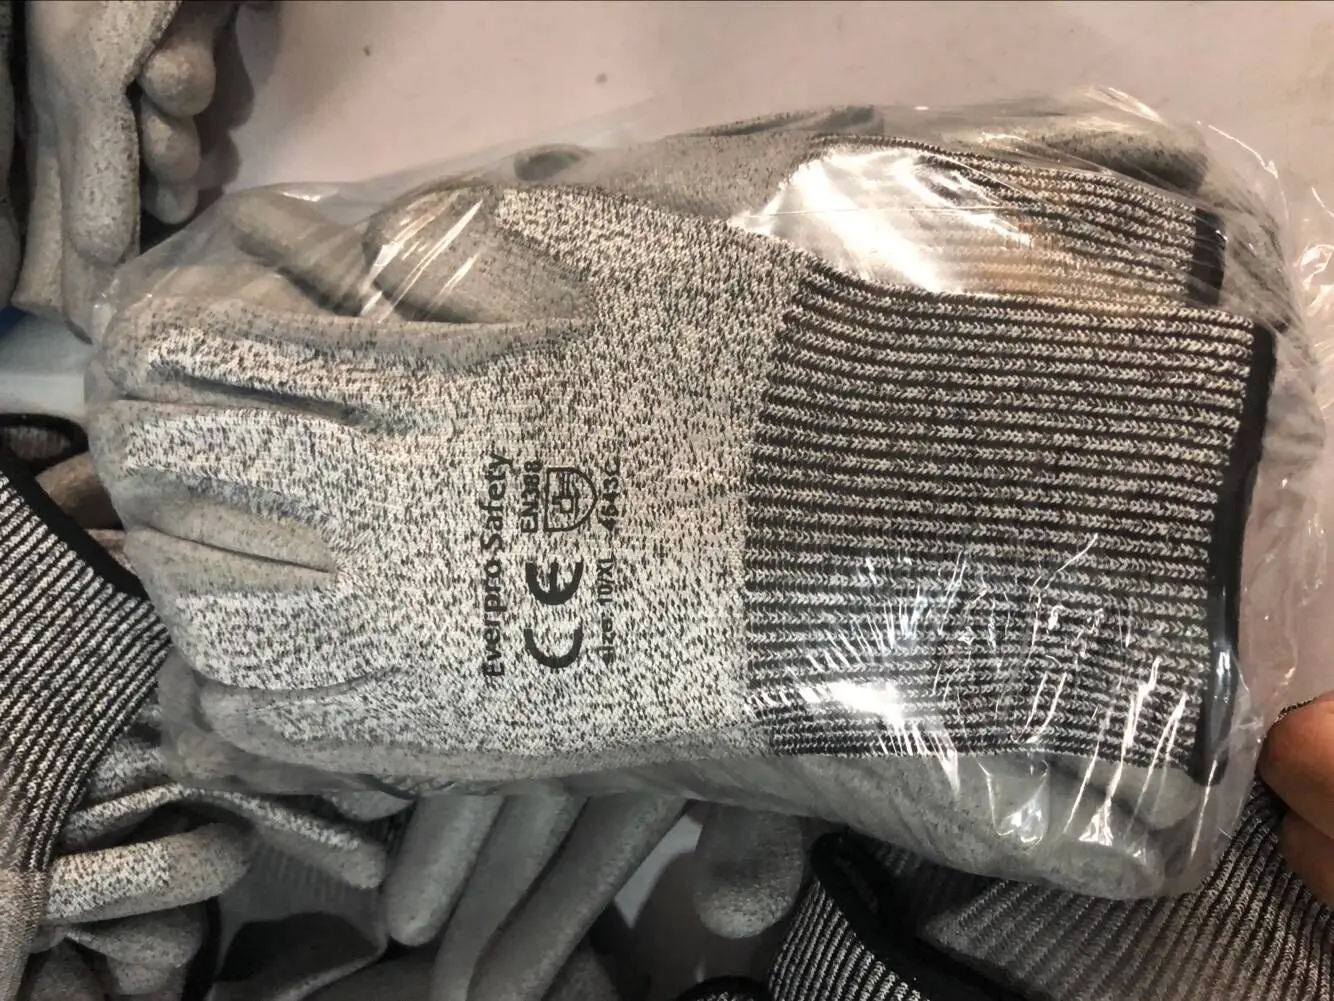 Cut Resistant 13G HPPE Grey PU Palm Coated Glove With Anti Cut Level 5